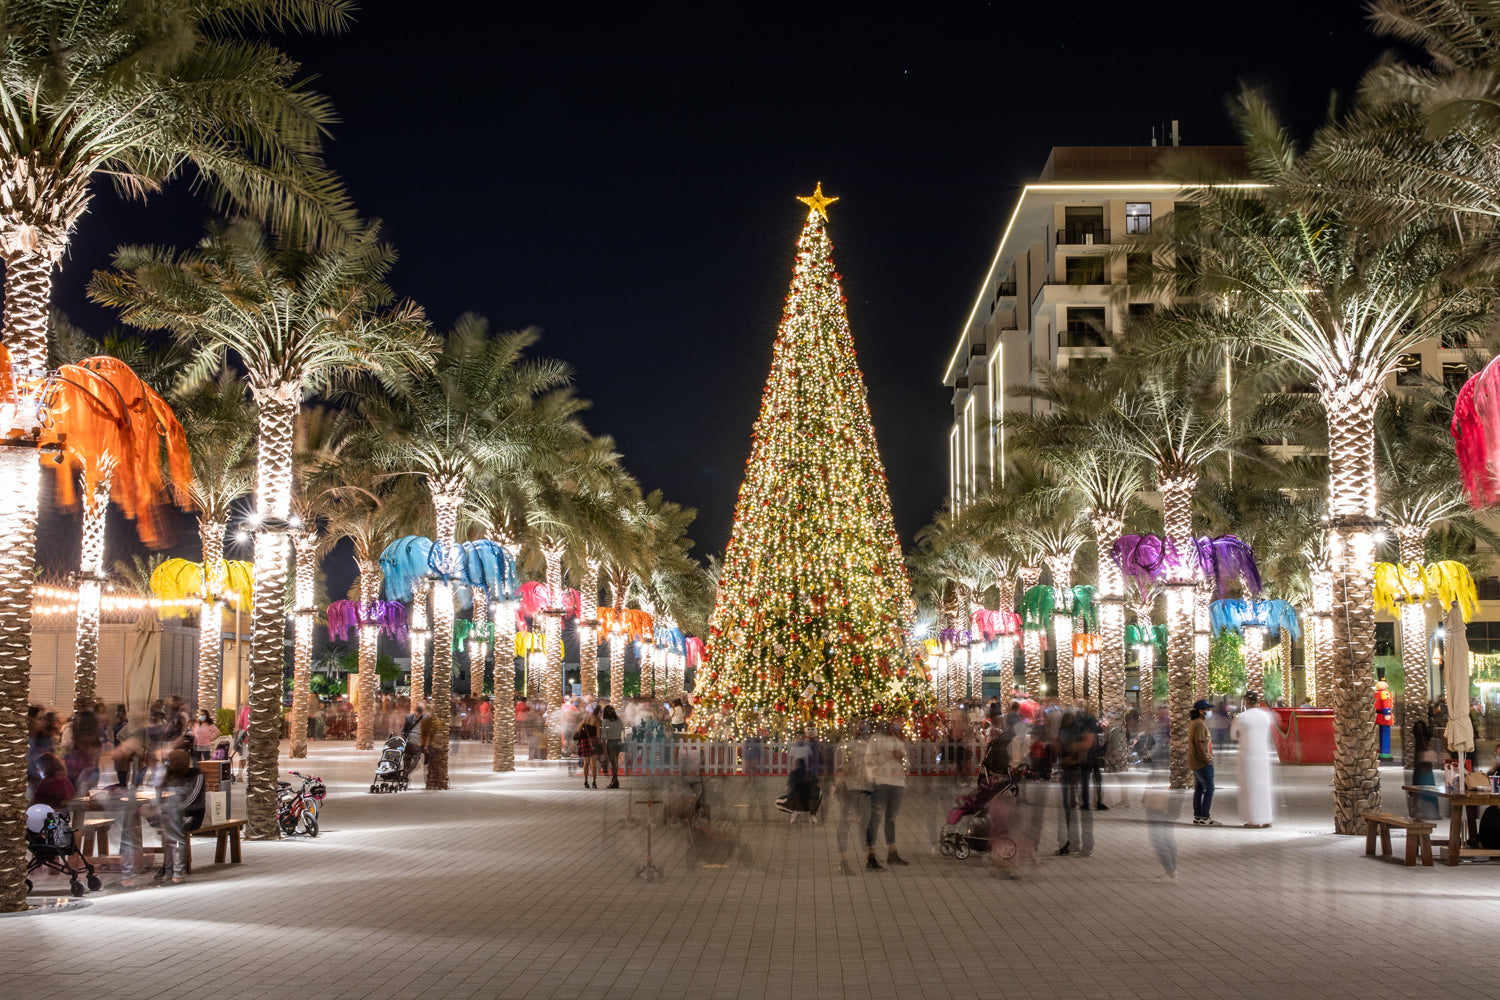 How to Spend Your Christmas in the UAE?